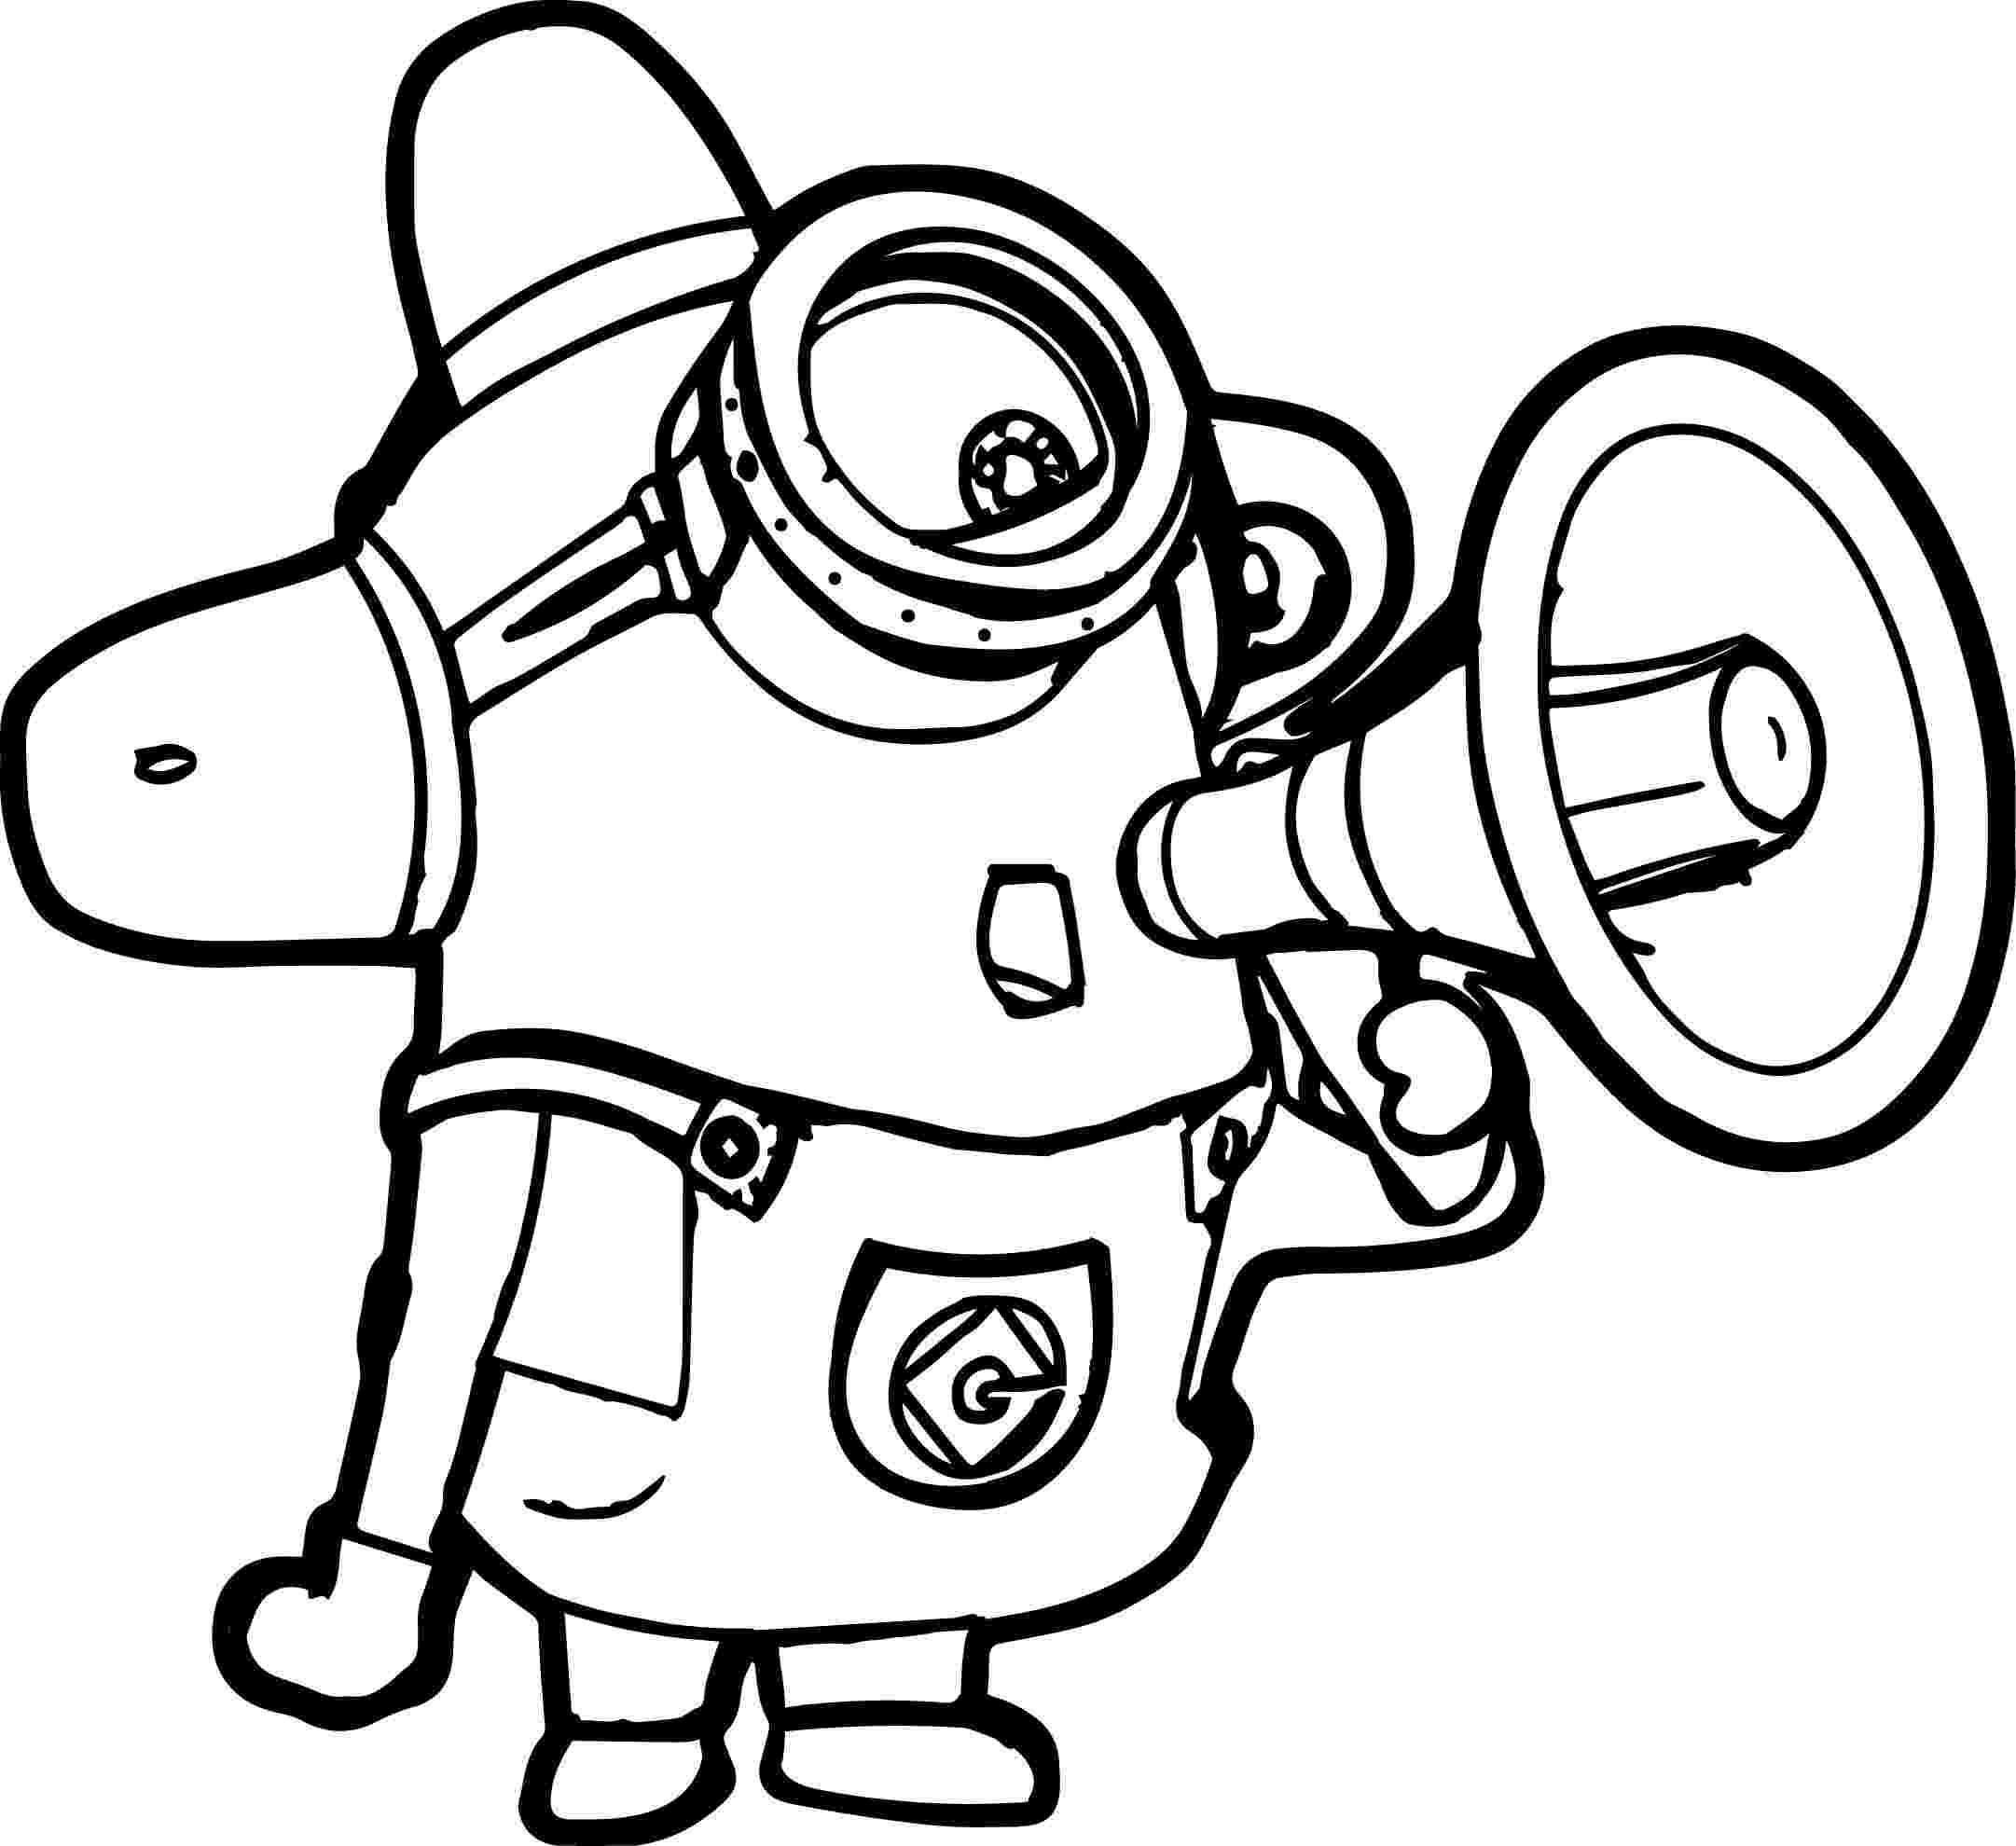 pictures of minions to color minion coloring pages best coloring pages for kids minions pictures of to color 